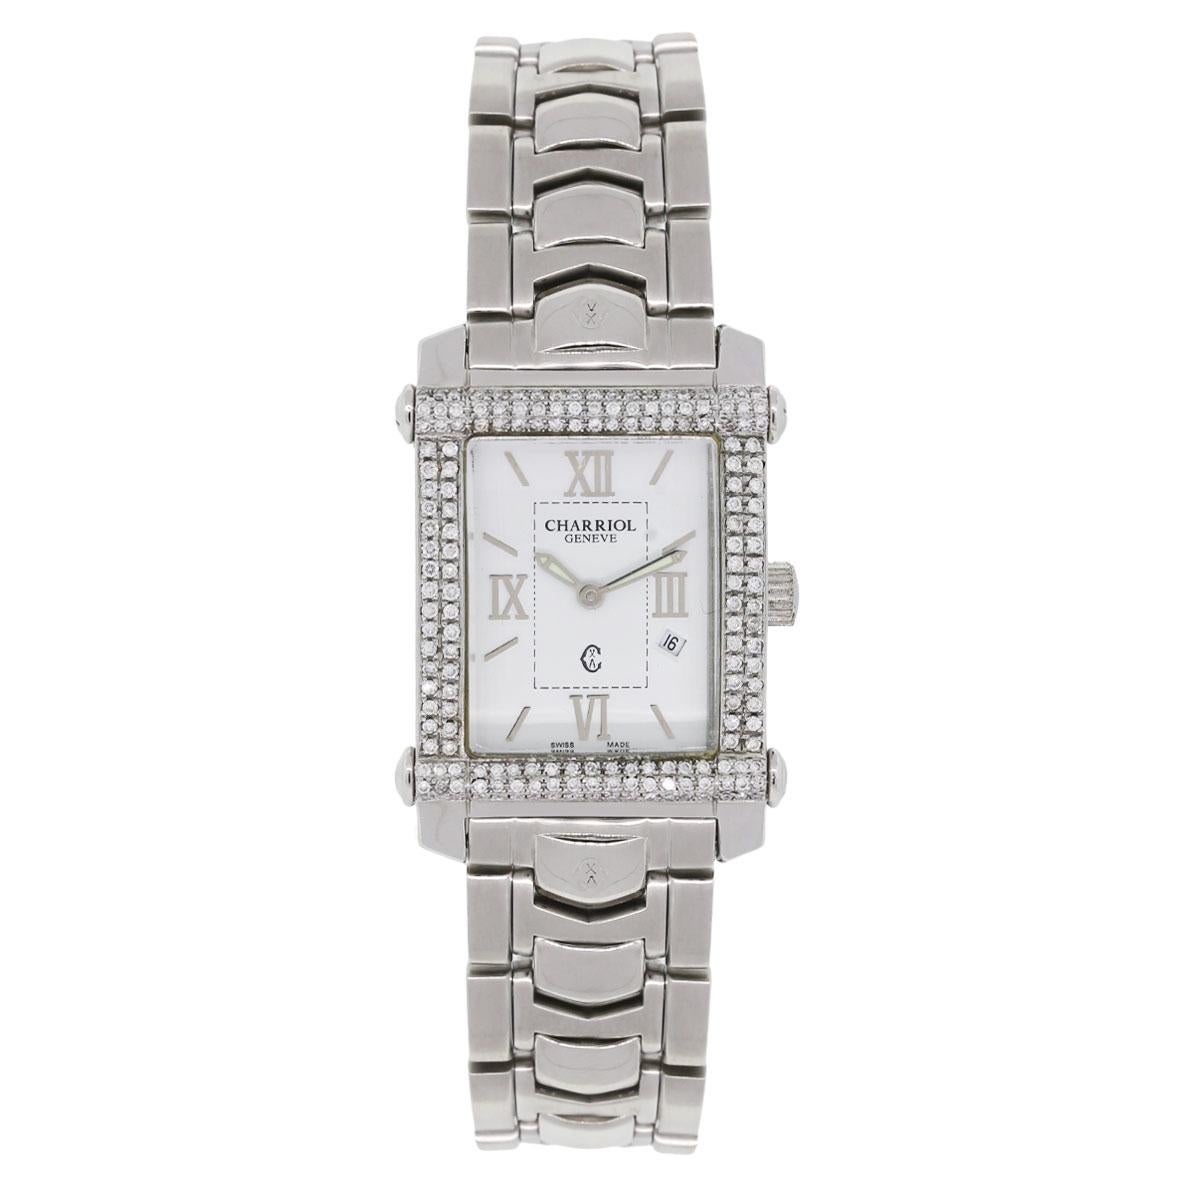 Brand: Charriol
MPN: CCSTRH2
Model: Colvmbus
Case Material: Stainless Steel
Case Diameter: 25mm x 34mm
Crystal: Sapphire
Bezel: Round brilliant diamond pave bezel. Diamonds are G in color and VS1 in clarity
Dial: White roman dial with date window